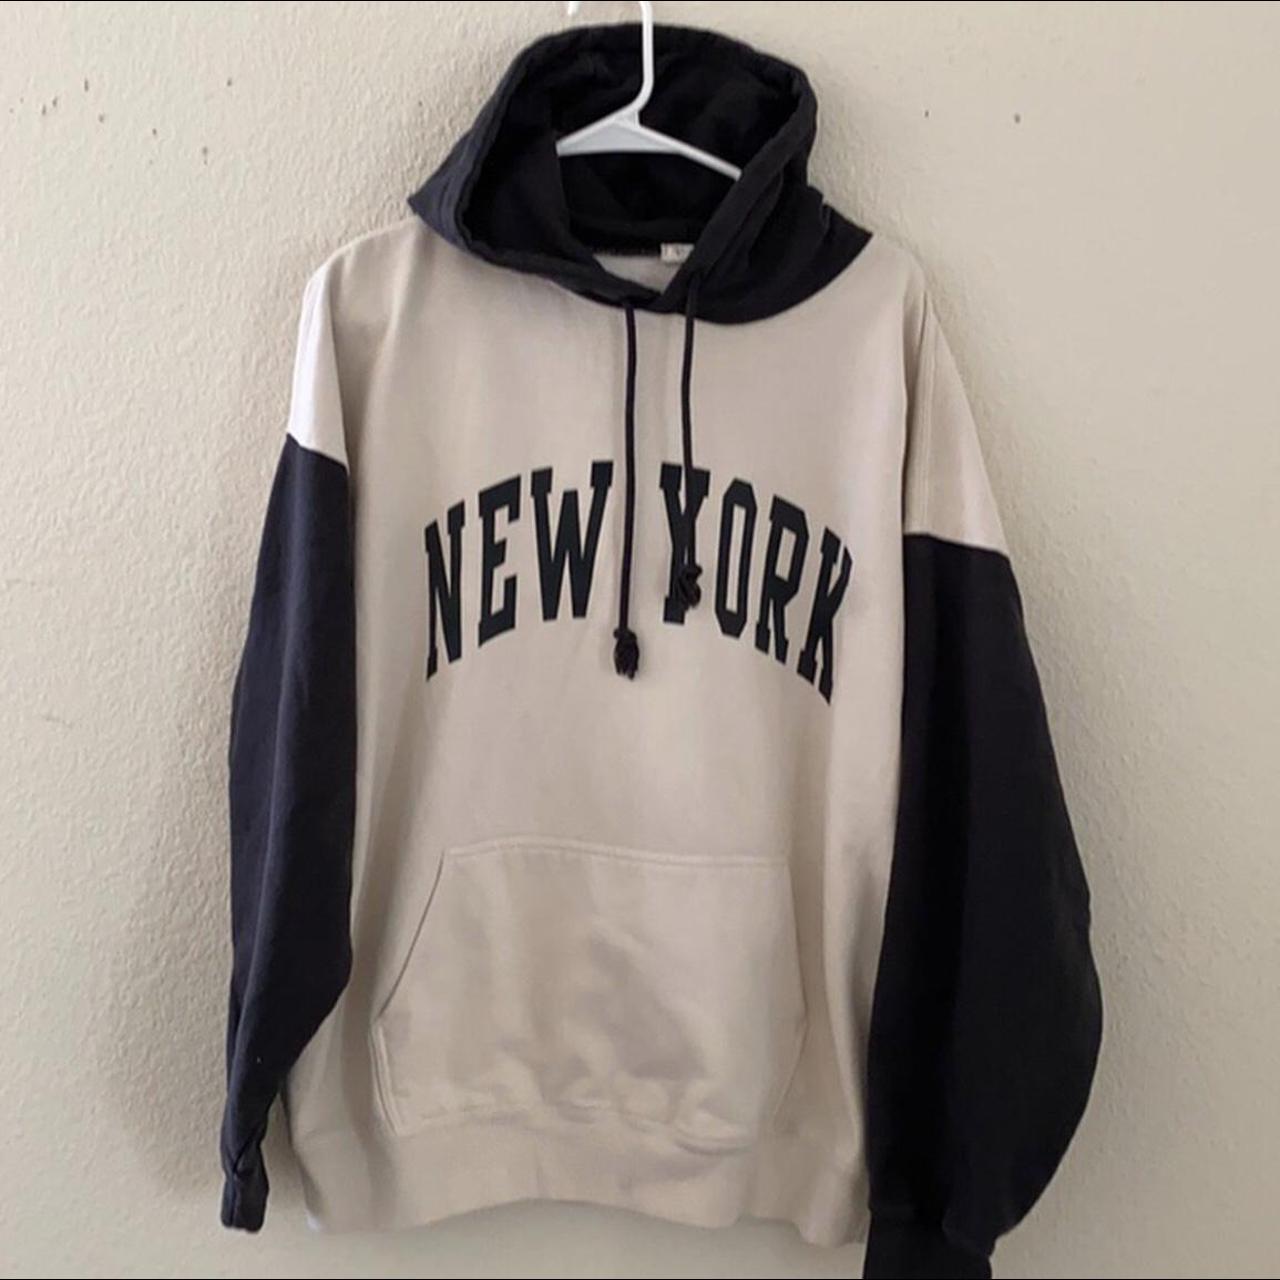 LET ME KNOW BEFORE BUYING brandy melville new york - Depop